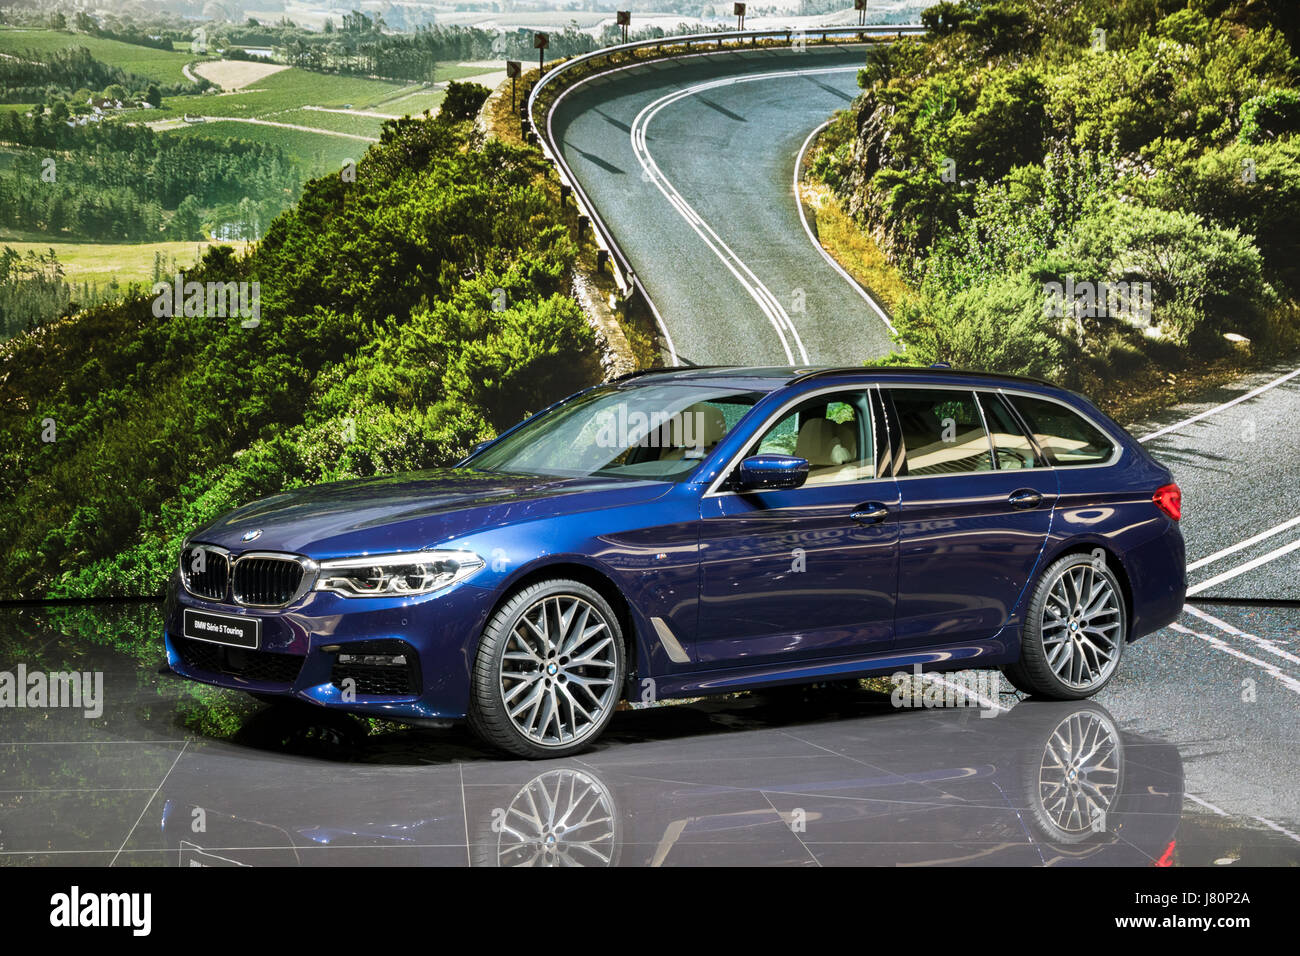 Recycled car - BMW G31 Touring - page 1